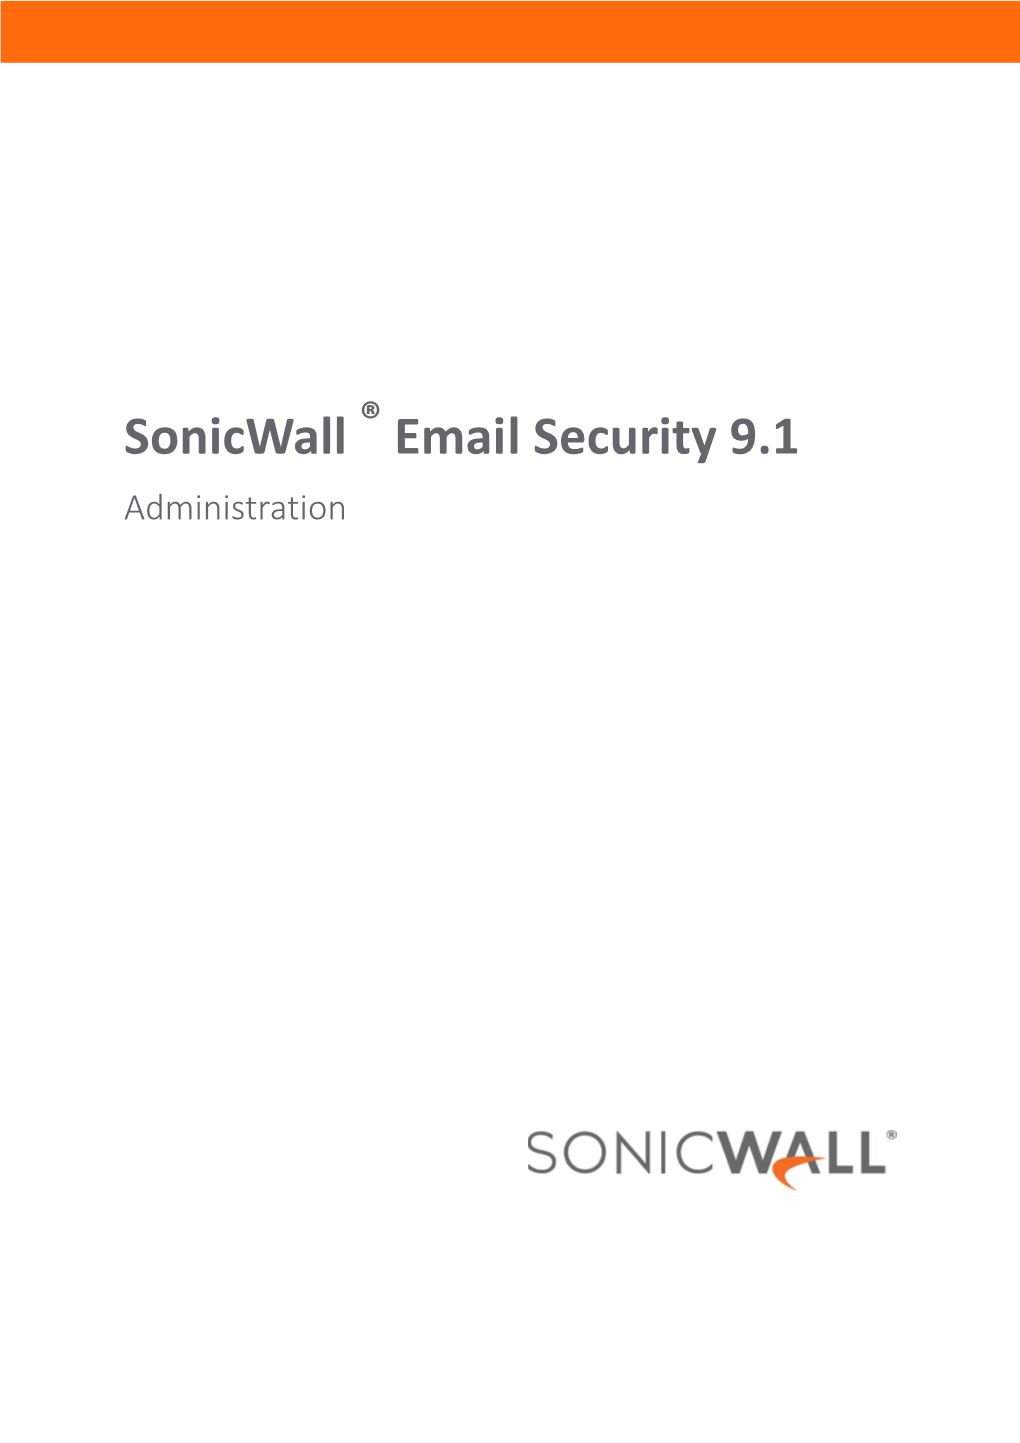 Email Security 9.1 Administration Guide